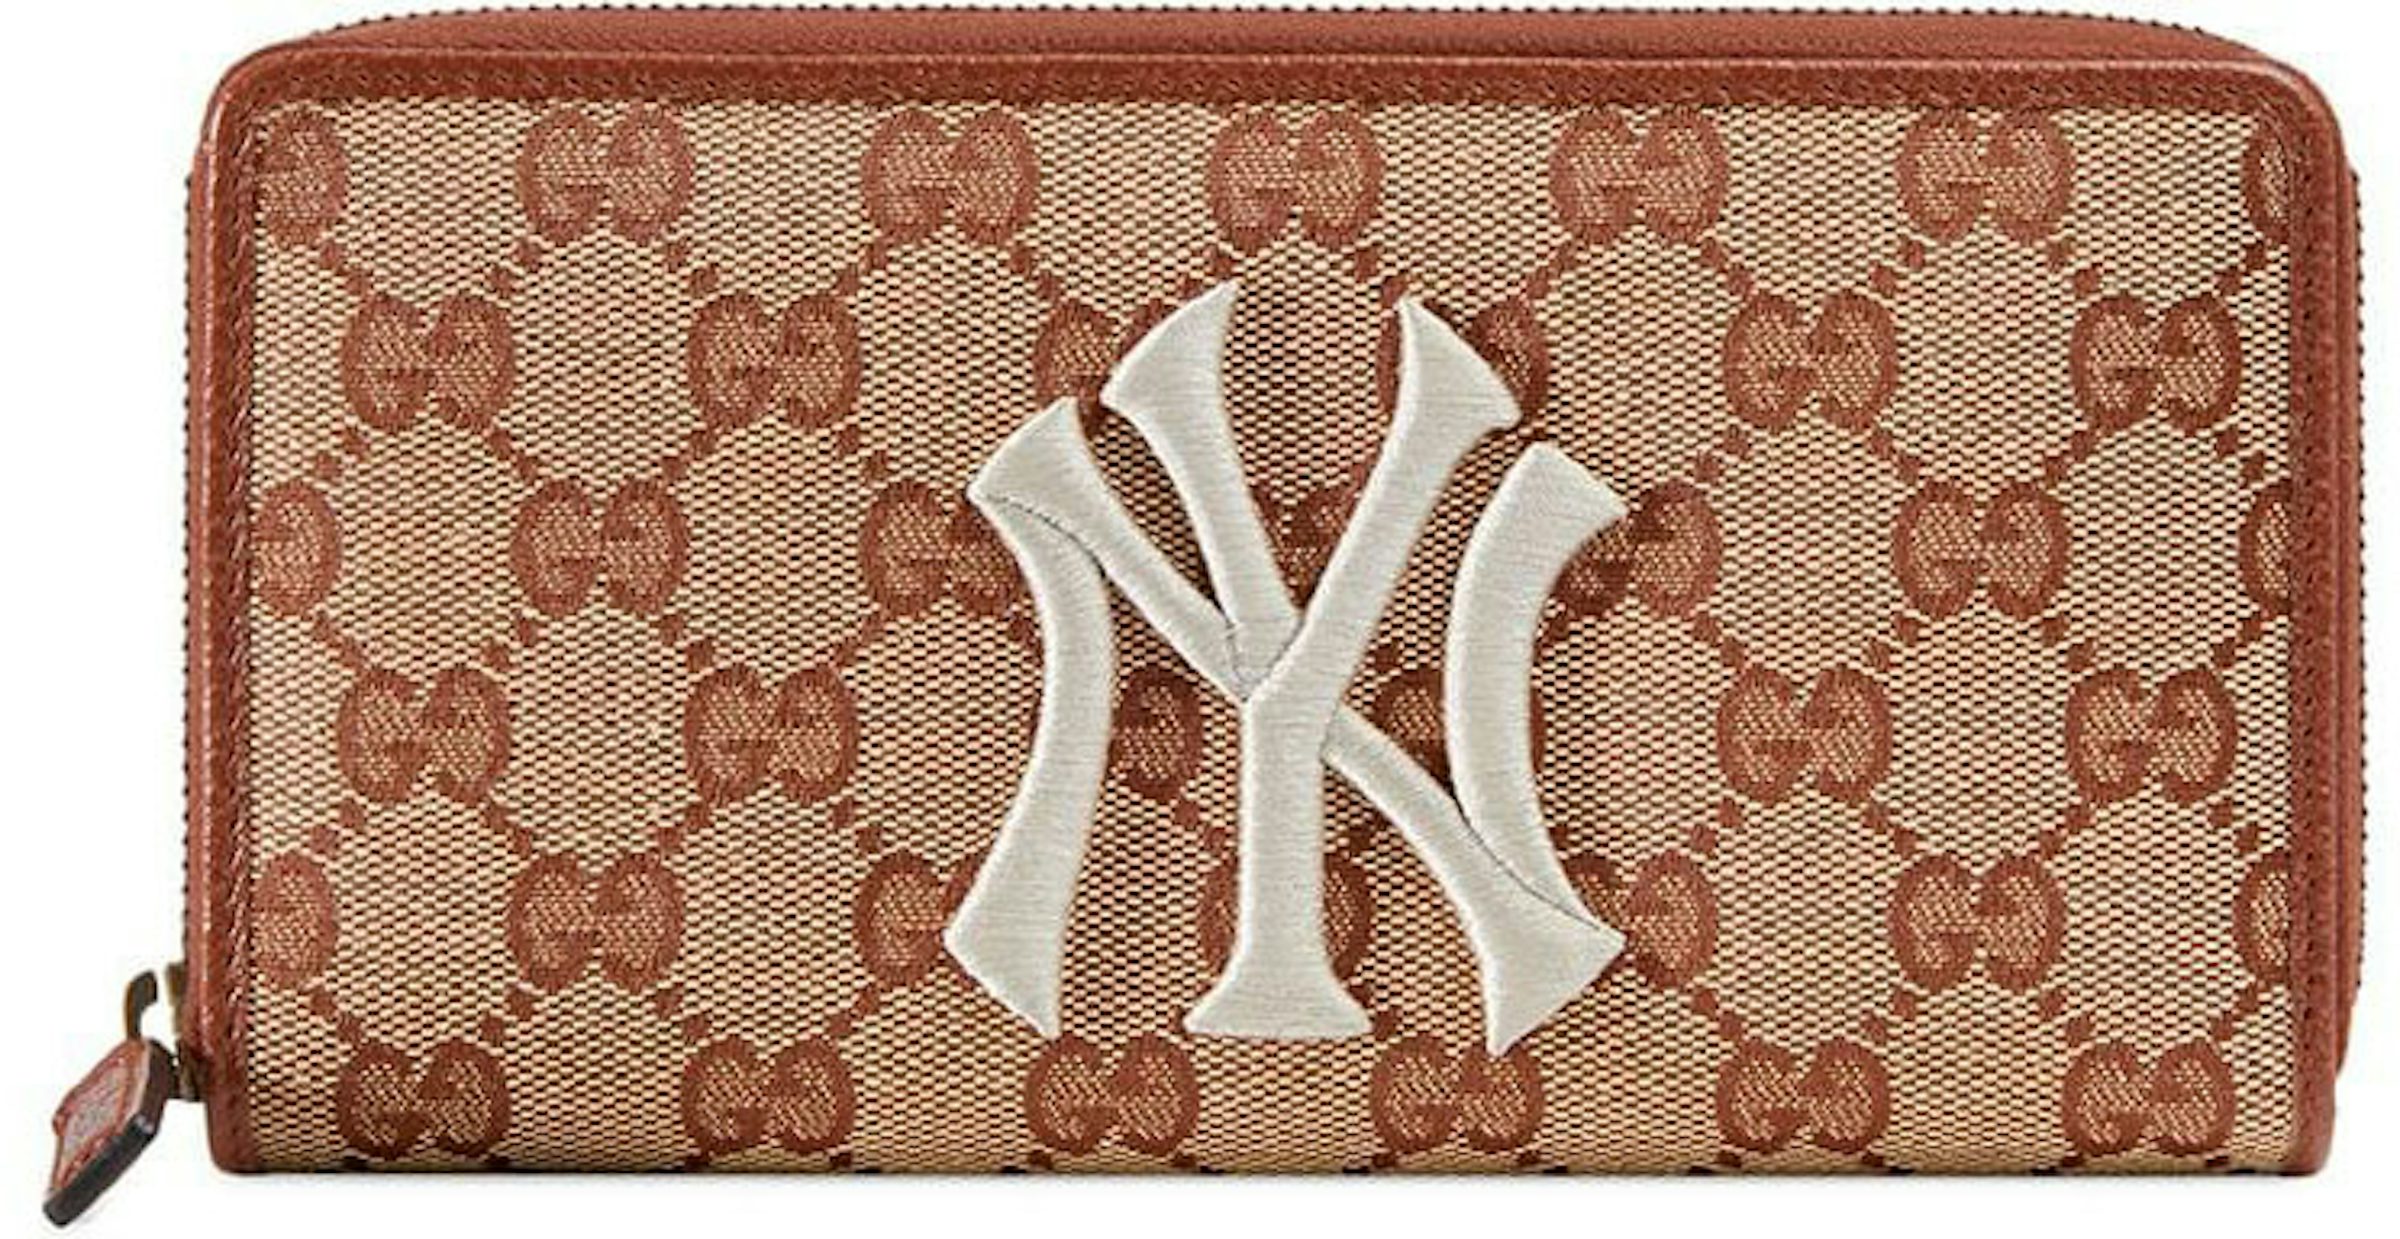 Buy Coach Zip-Around Wallet with Mickey Mouse & Friends Embroidery, Beige  Color Women